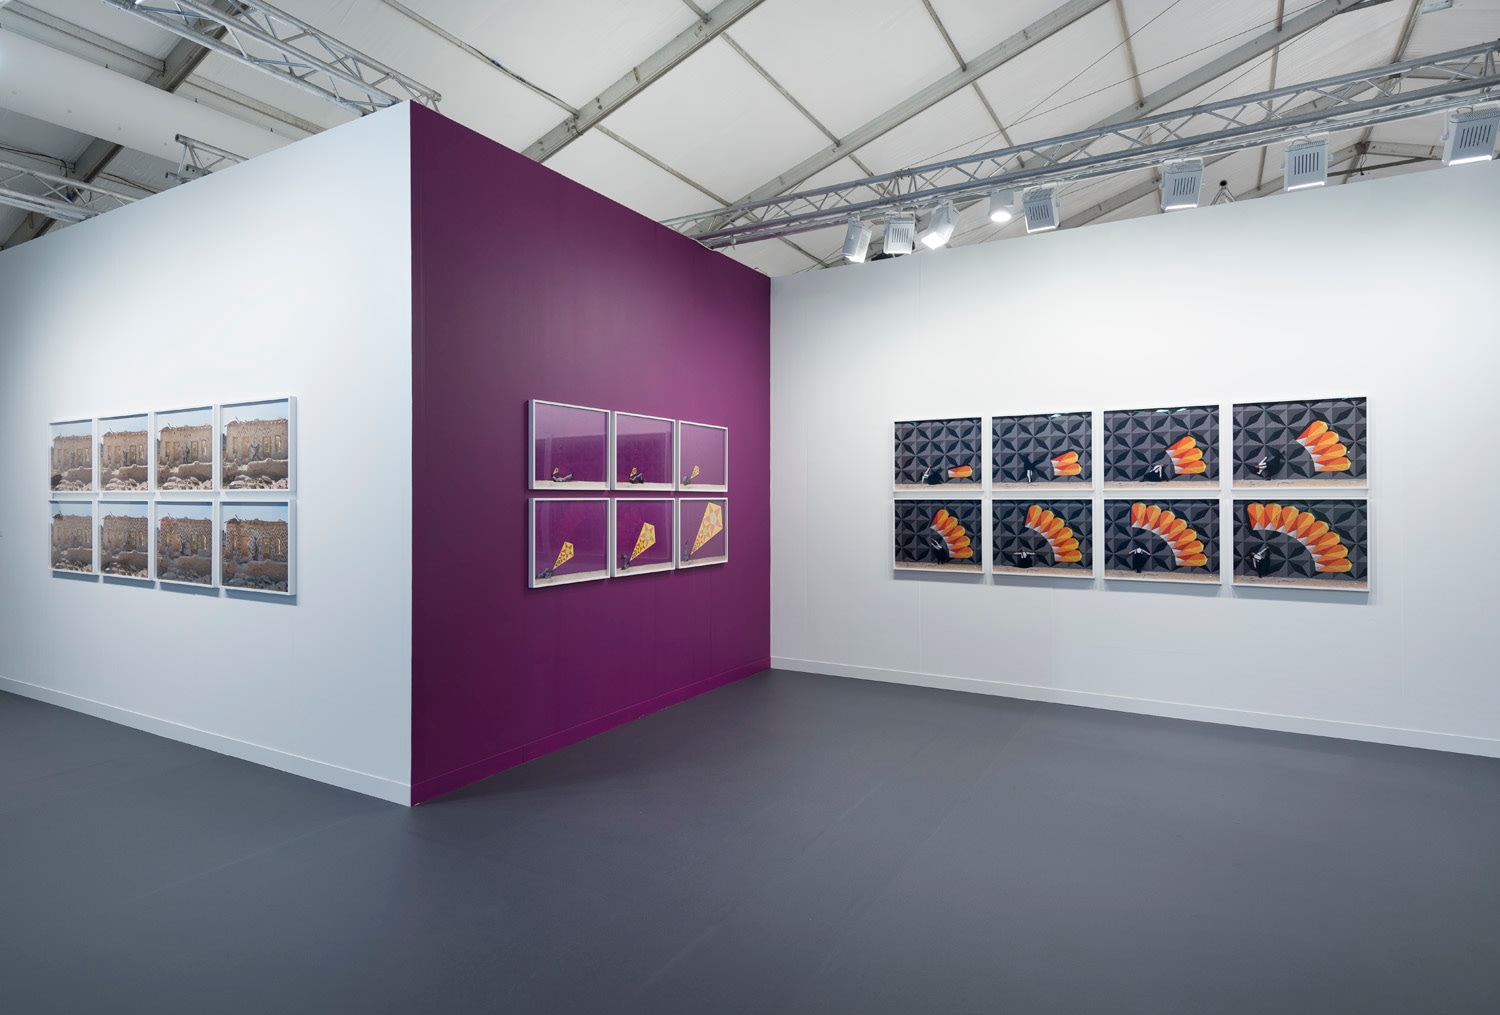 Installation view of Lehmann Maupin's booth at Frieze art fair in London 2019, view 4